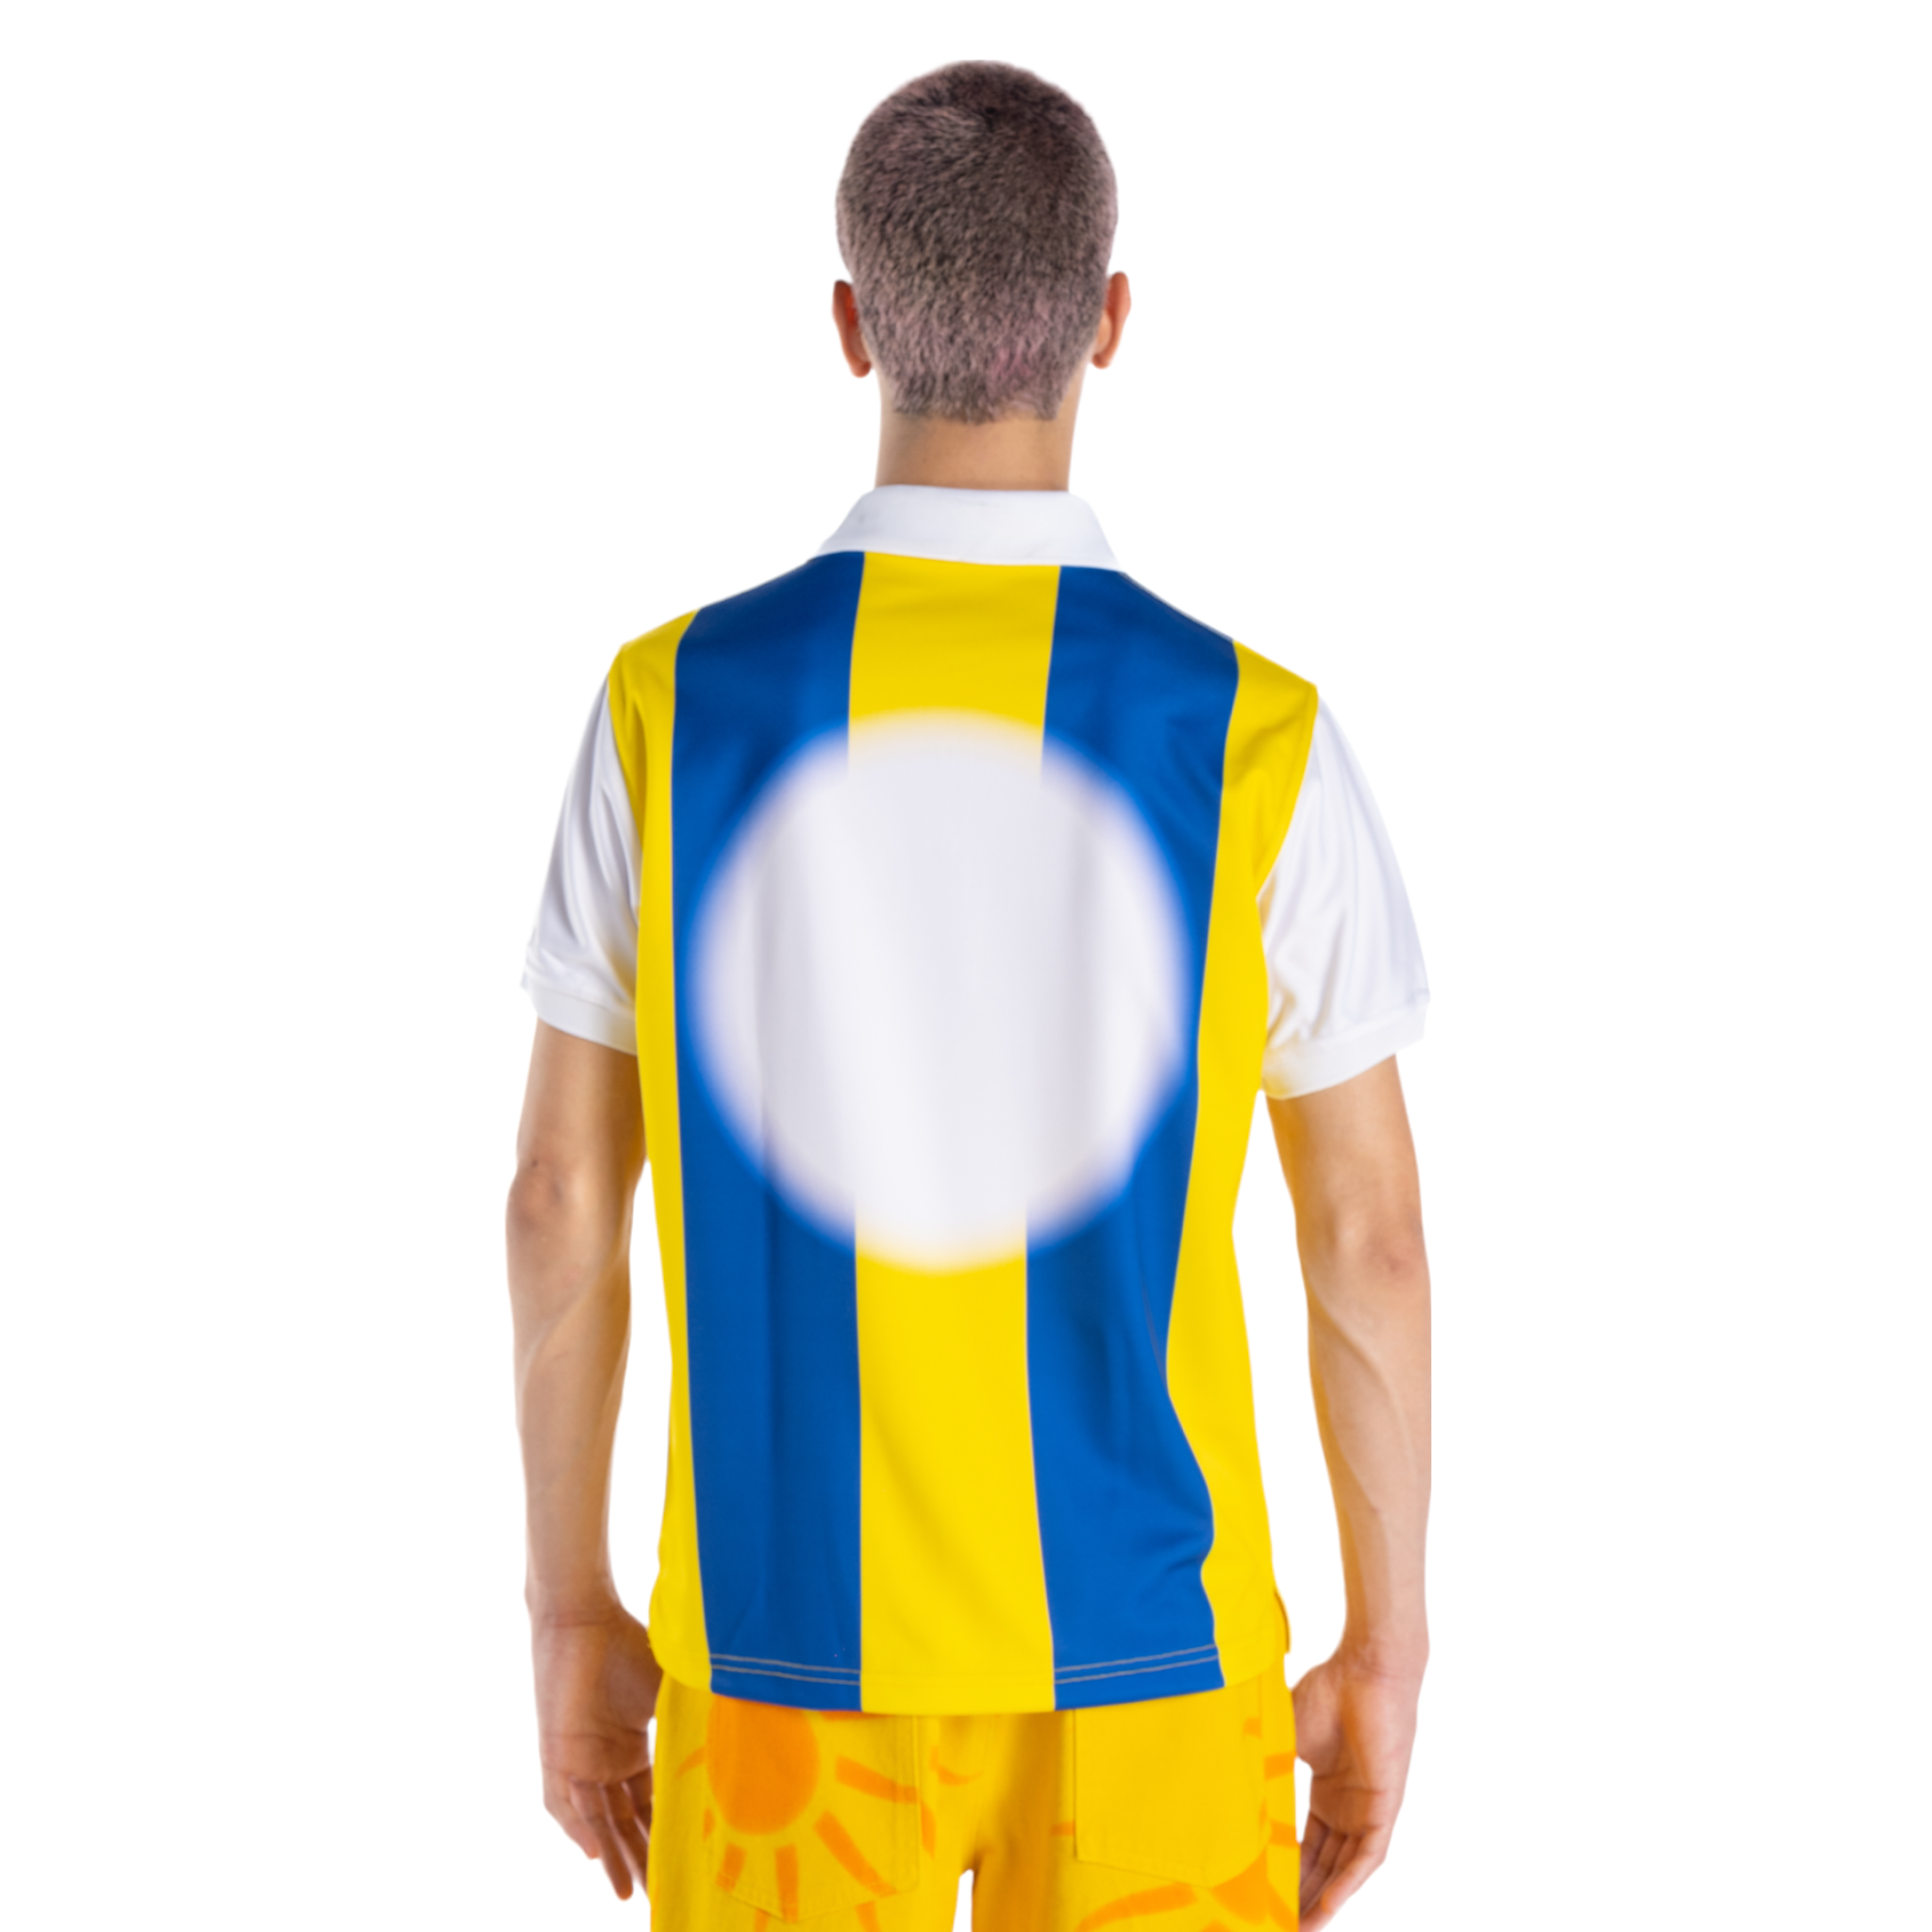 Unisex Football Polo Shirt Blue/Yellow - Liberal Youth Ministry